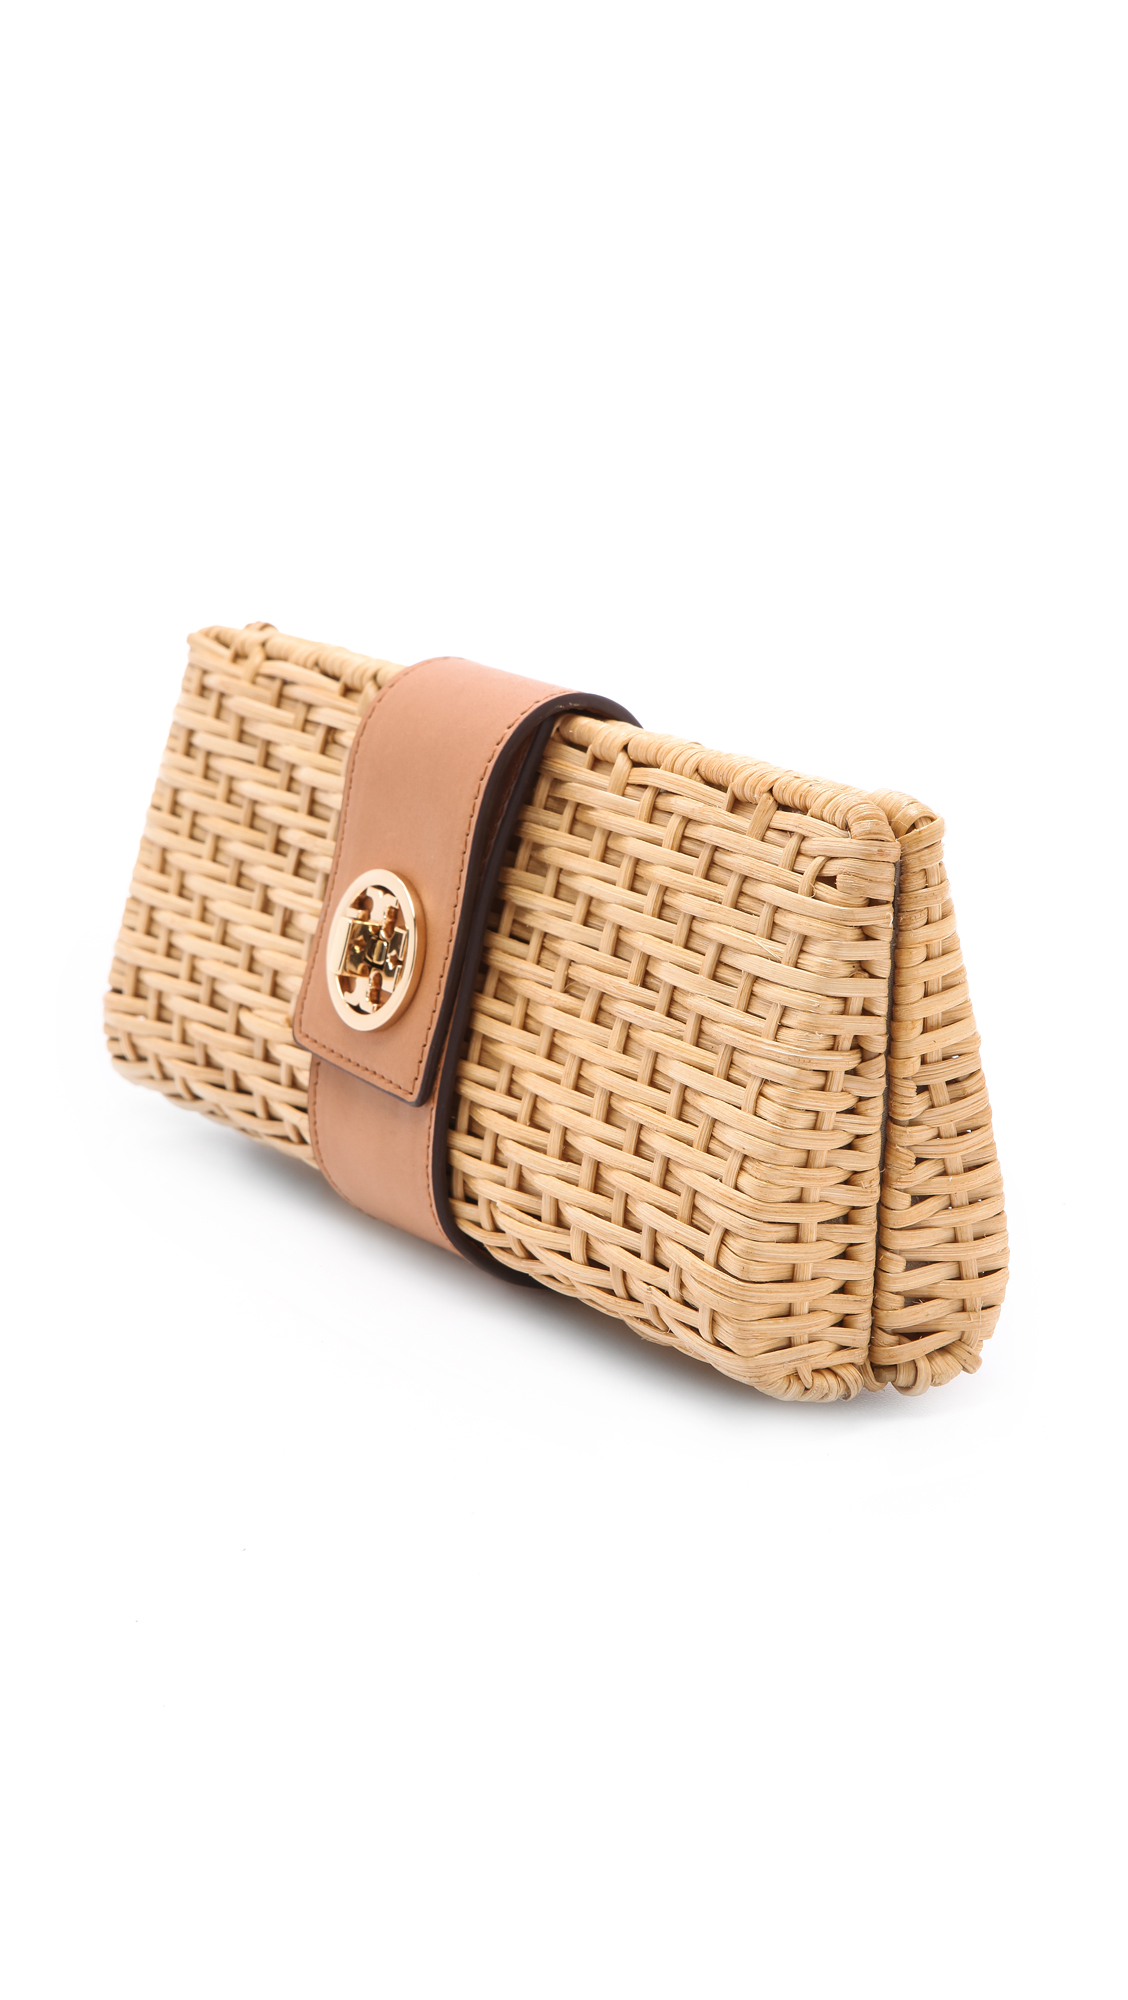 Tory Burch Lacquered Rattan Clutch in Natural | Lyst